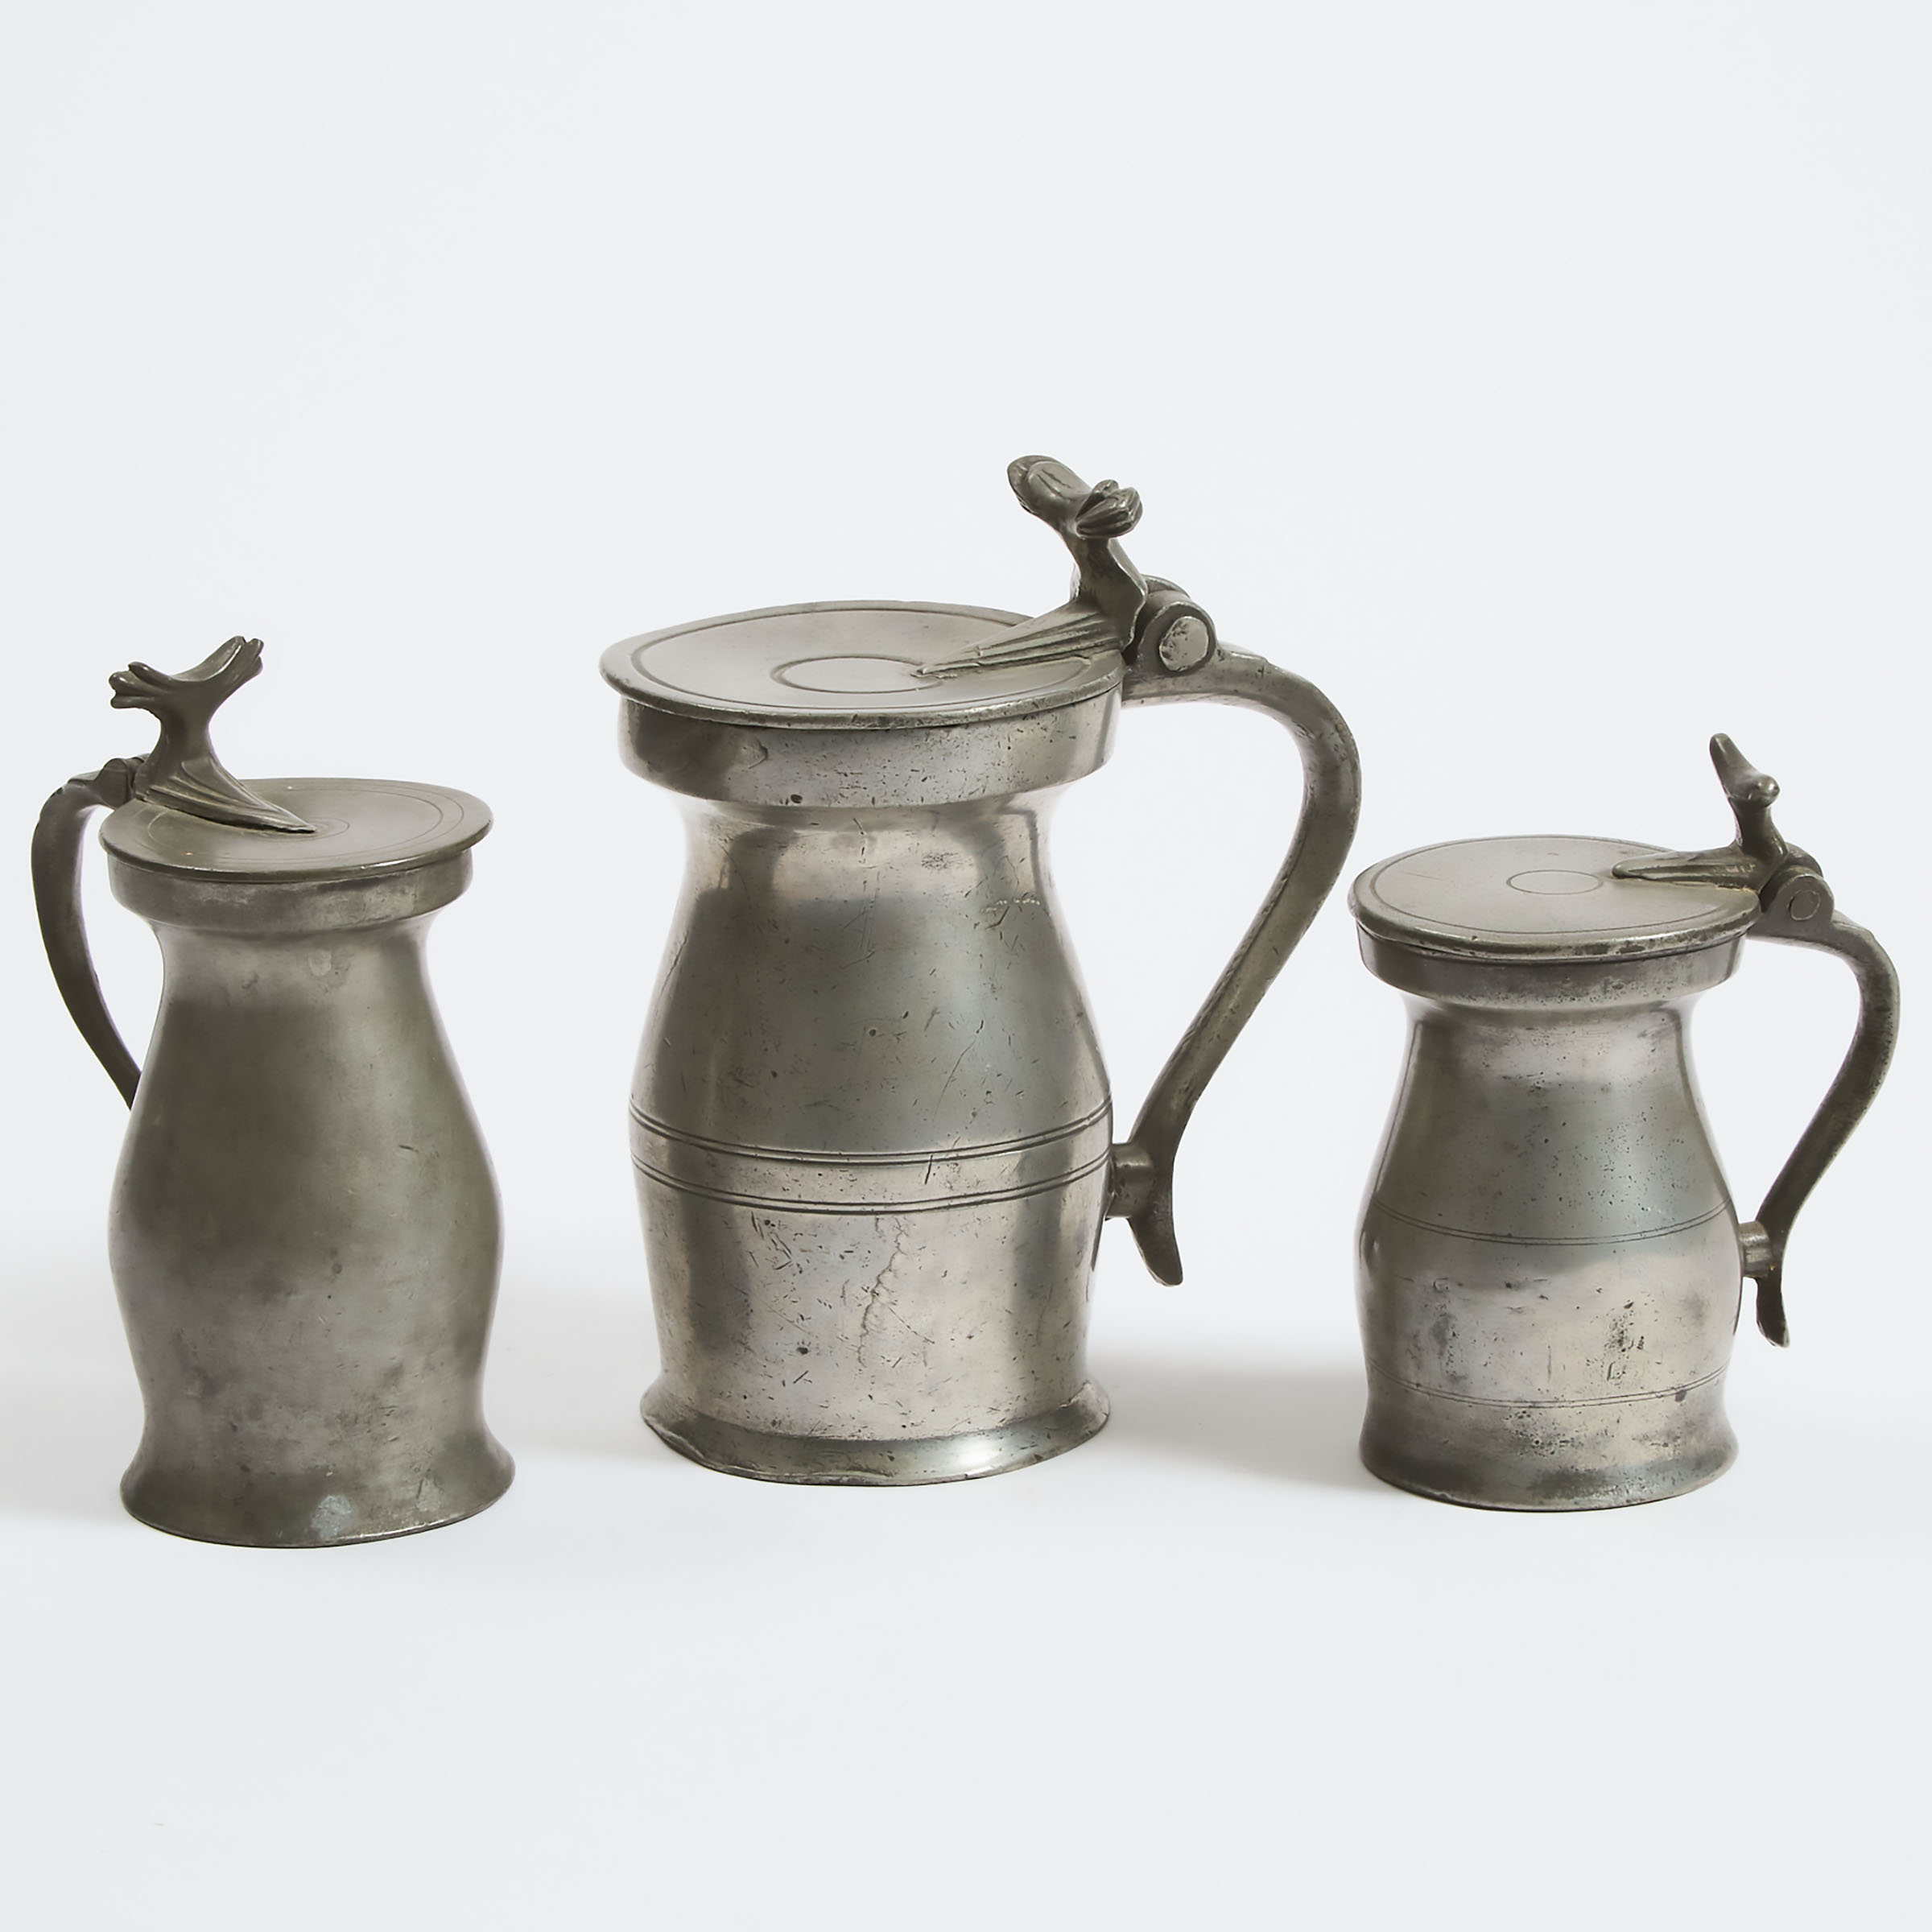 Three English Pewter Flat Lidded Bud Wine Measures, 18th/early 19th century